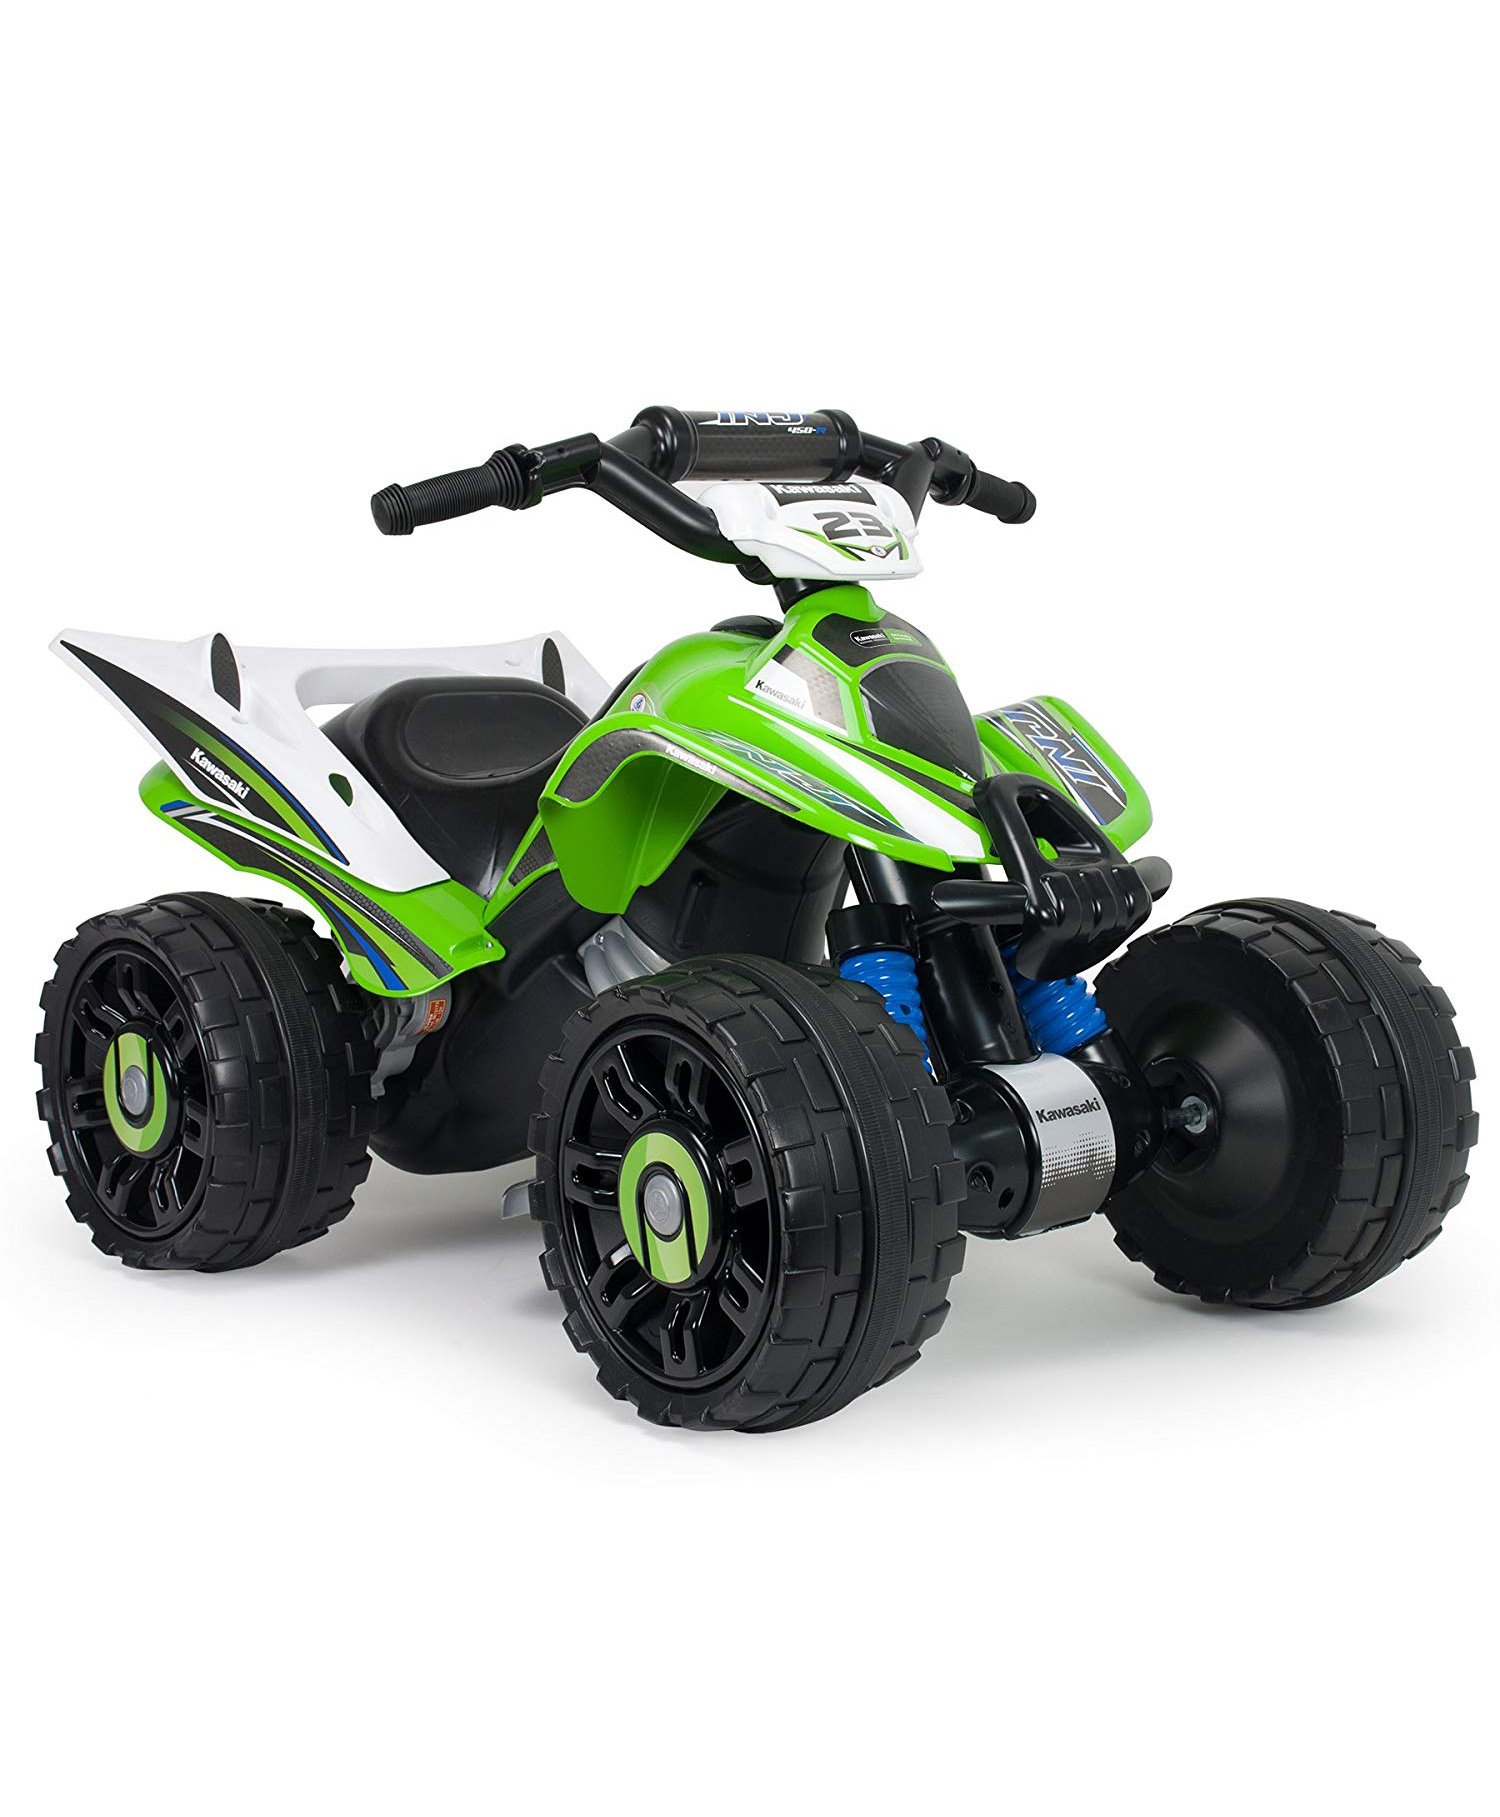 Injusa Kawasaki Quad Battery Operated ATV - Green Online India, Buy at Best Price from FirstCry.com - 3223539